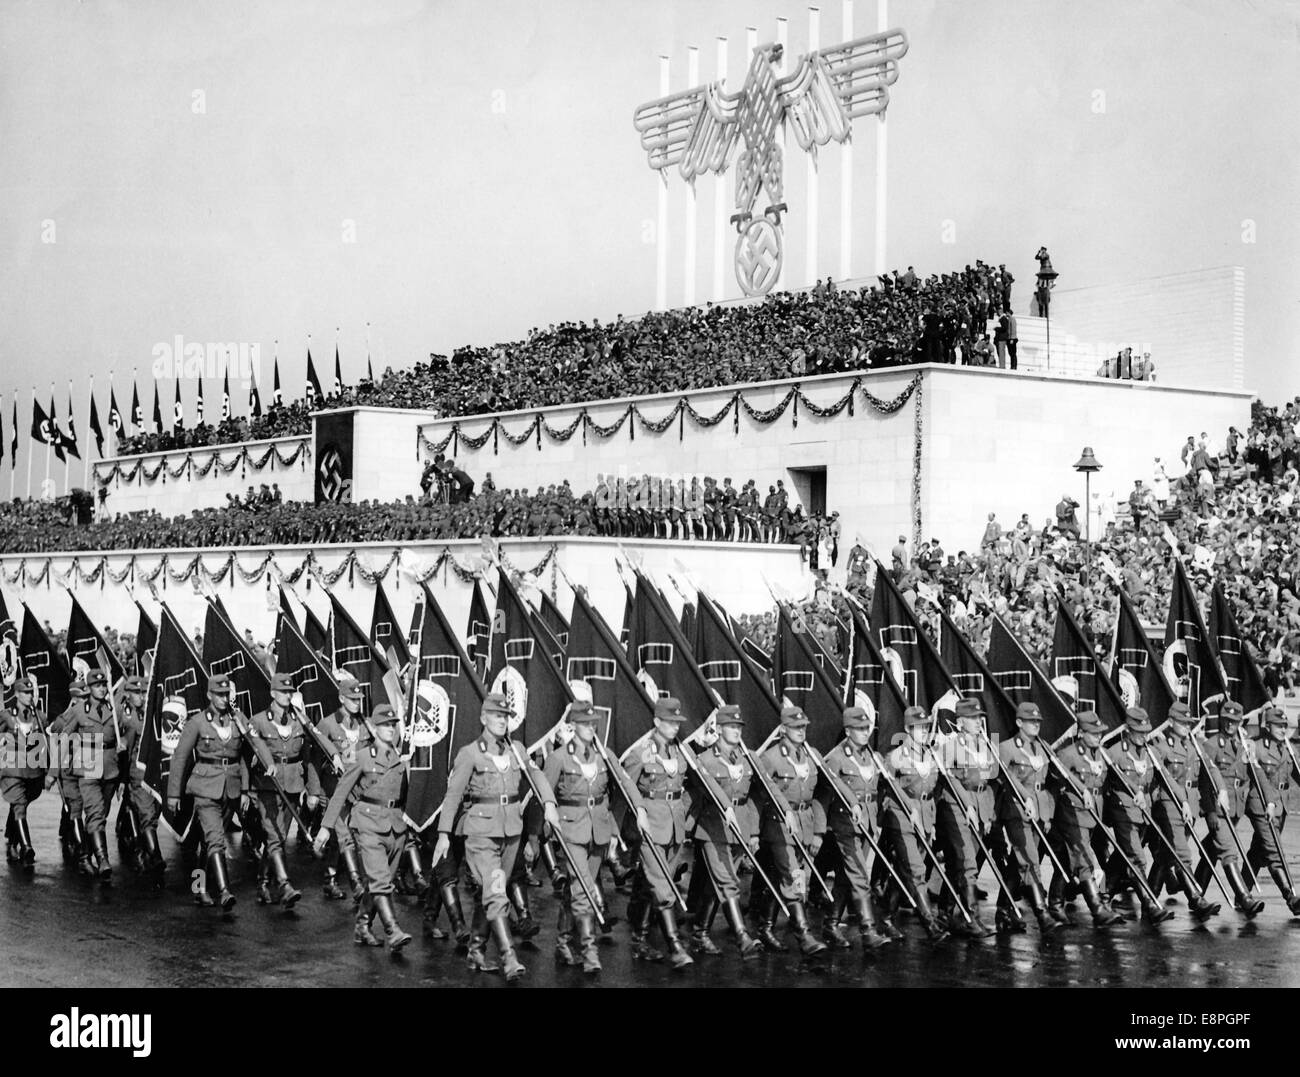 Nuremberg Rally 1935 in Nuremberg, Germany - Members of the Reichsarbeitsdienst (Reich Labour Service, RAD) march past the newly erected grandstand on Zeppelin Field during a roll call. (Flaws in quality due to the historic picture copy) Fotoarchiv für Zeitgeschichtee - NO WIRE SERVICE - Stock Photo